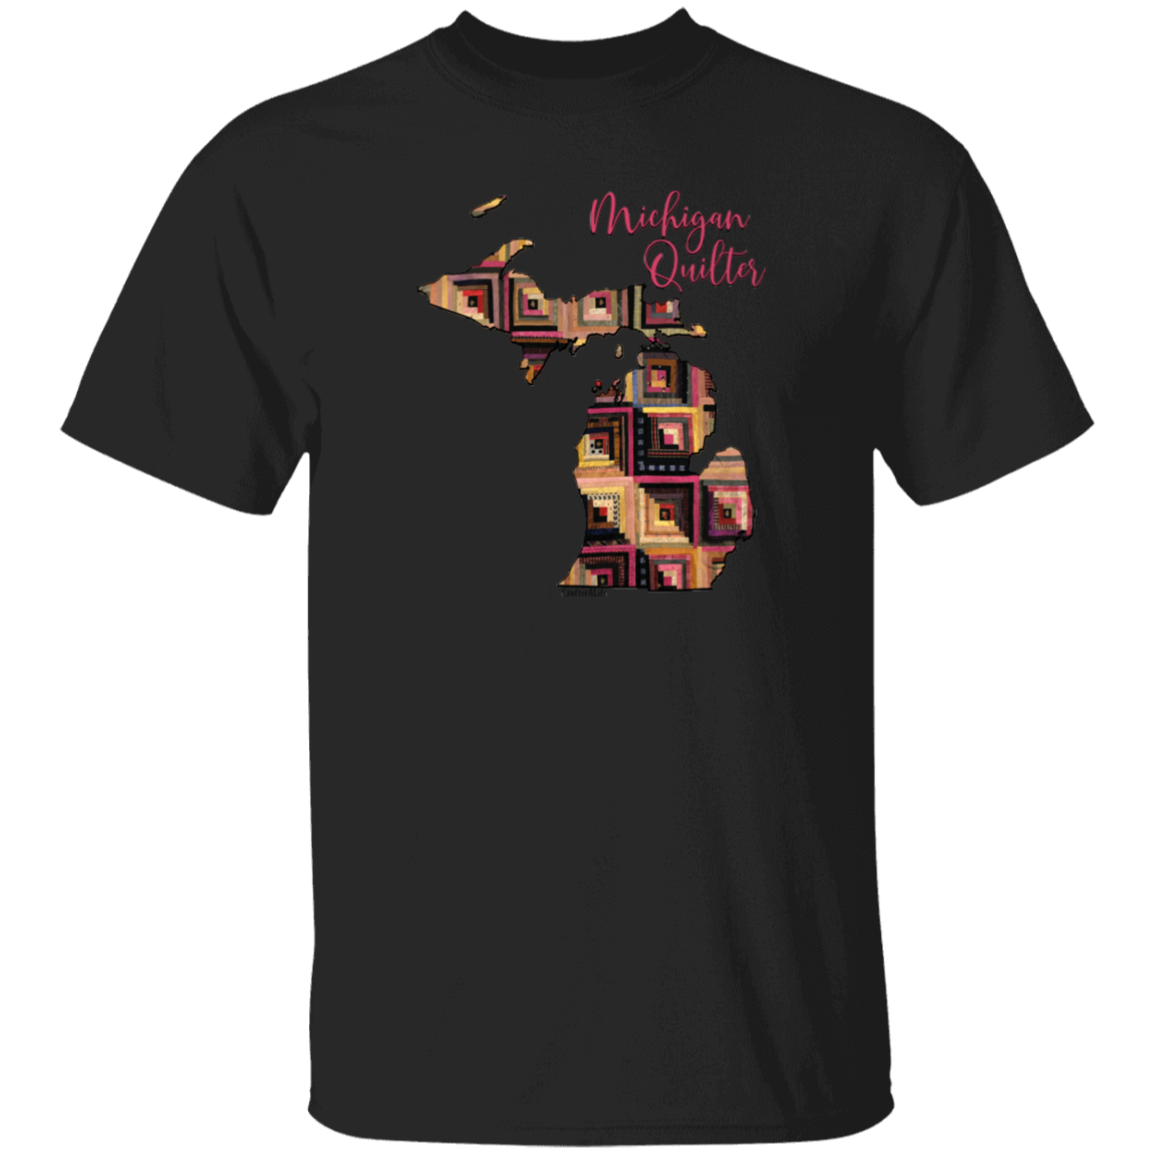 Michigan Quilter T-Shirt, Gift for Quilting Friends and Family